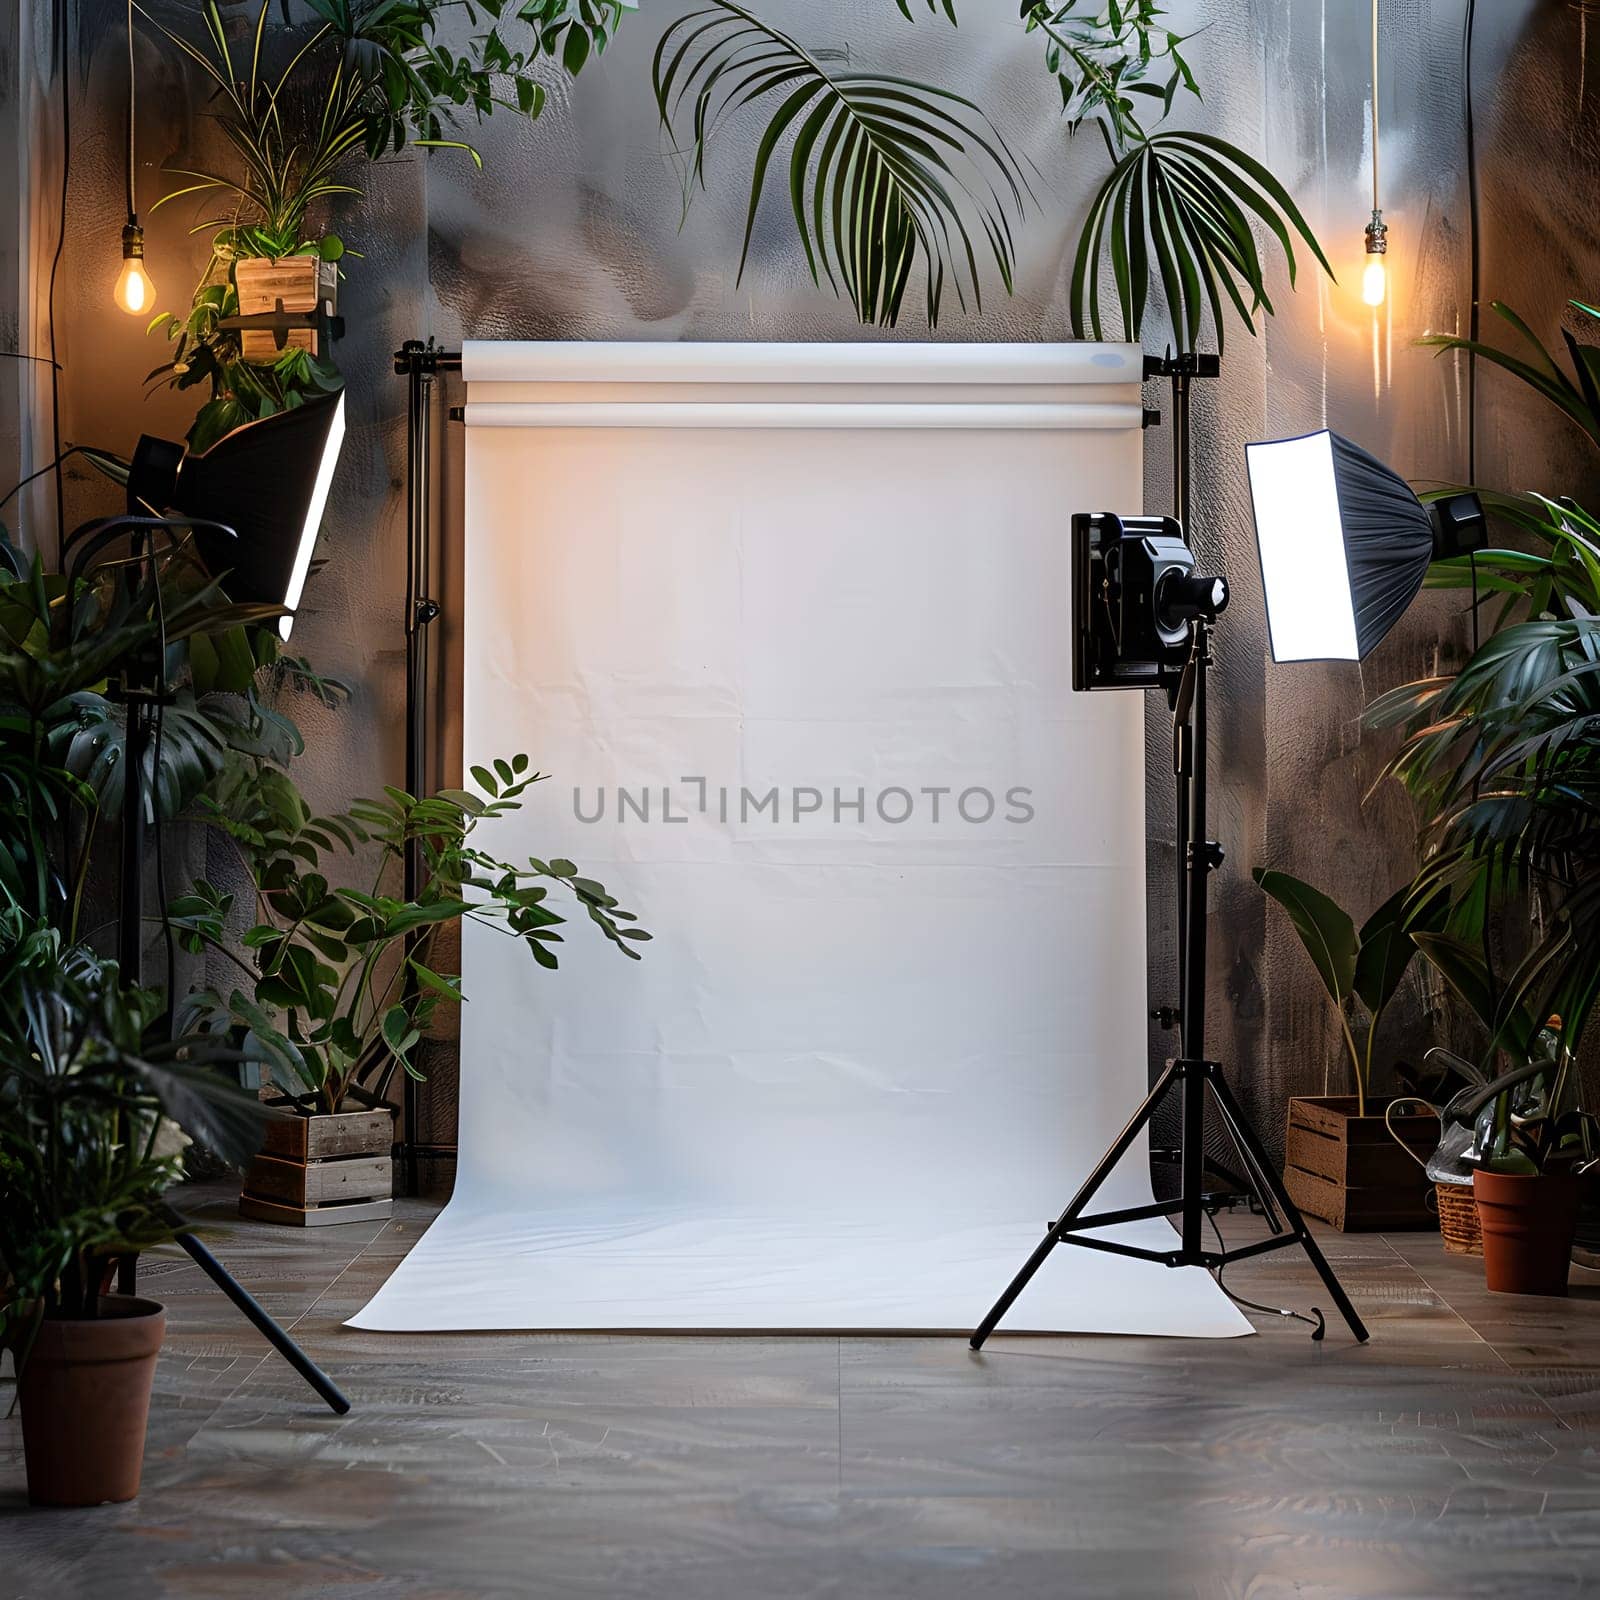 A photo studio with a white backdrop surrounded by plants and lights, creating a serene atmosphere with a touch of nature indoors